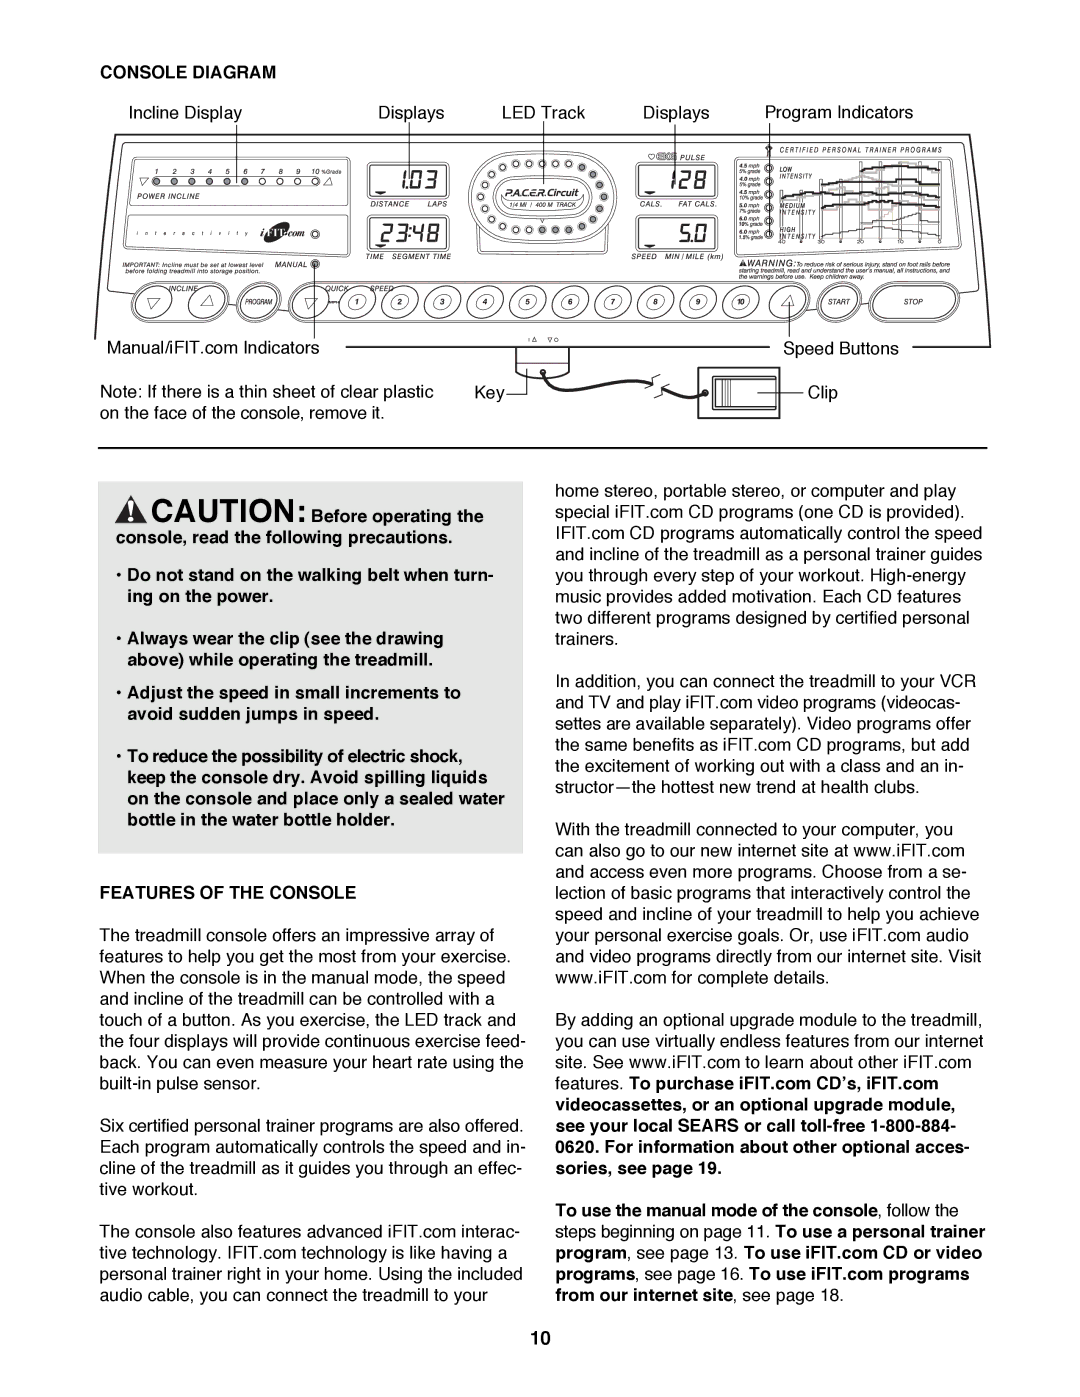 ProForm 831.299481 user manual Console Diagram, Features of the Console 